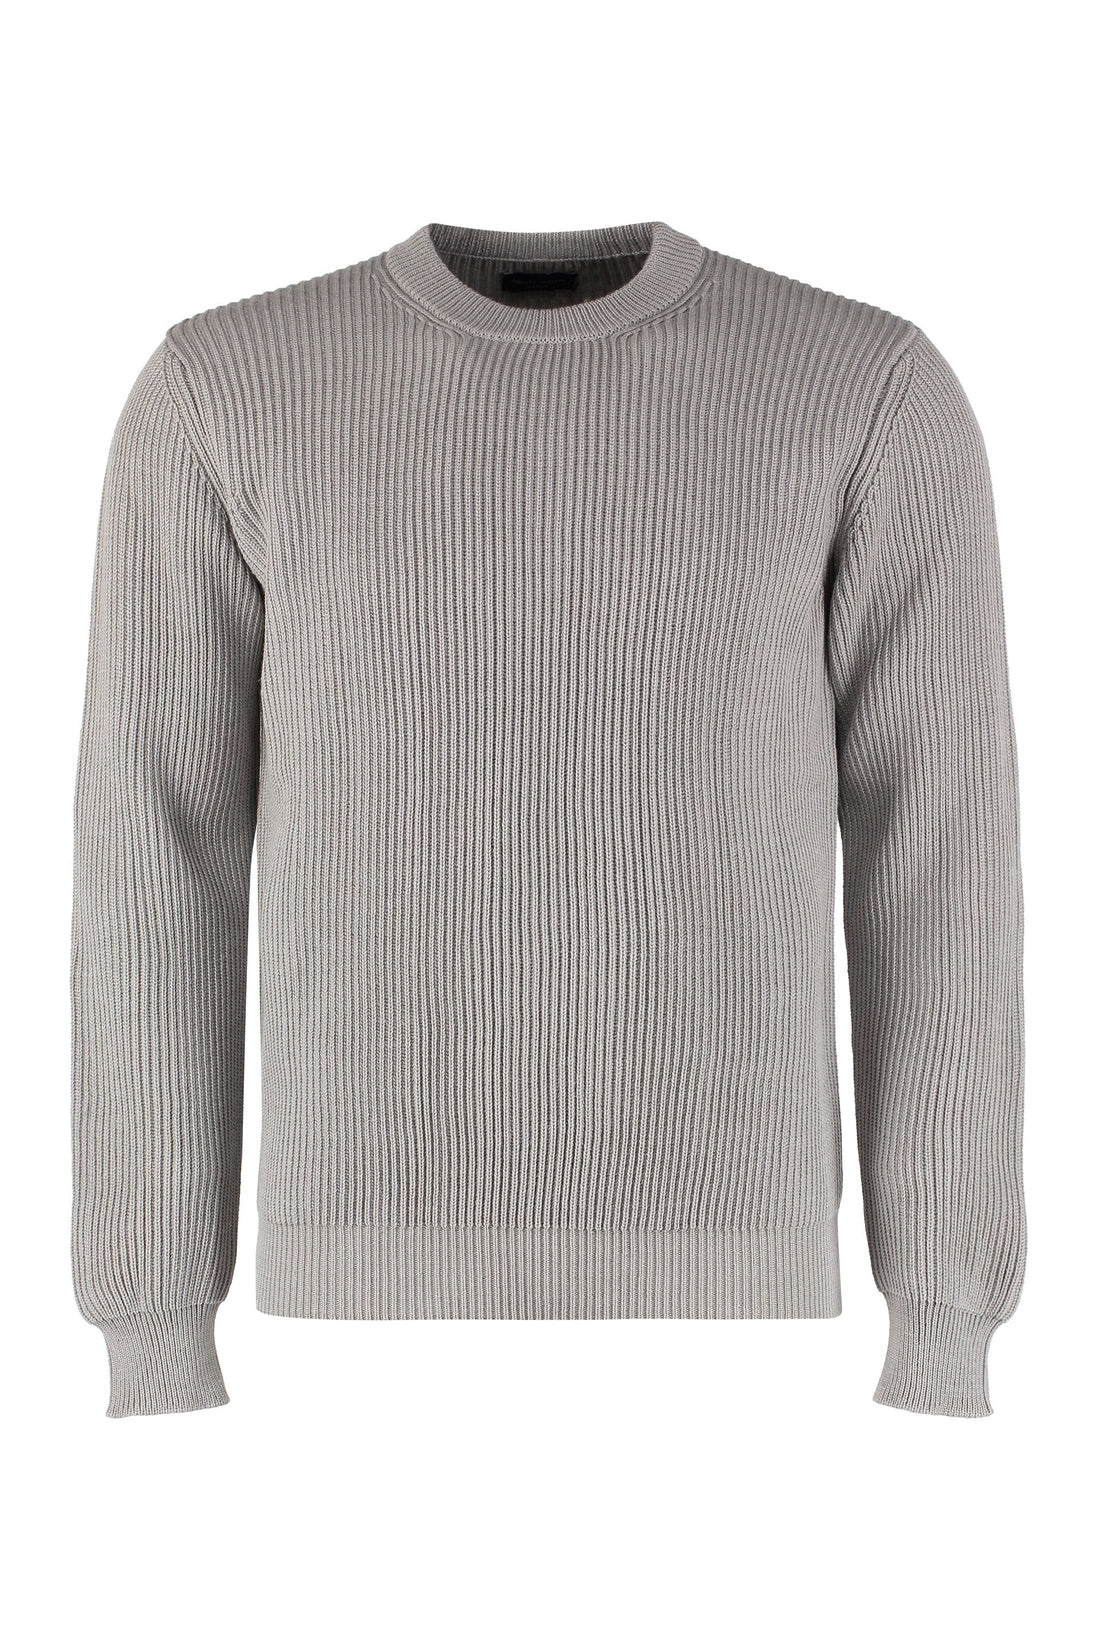 Roberto Collina-OUTLET-SALE-Wool sweater-ARCHIVIST